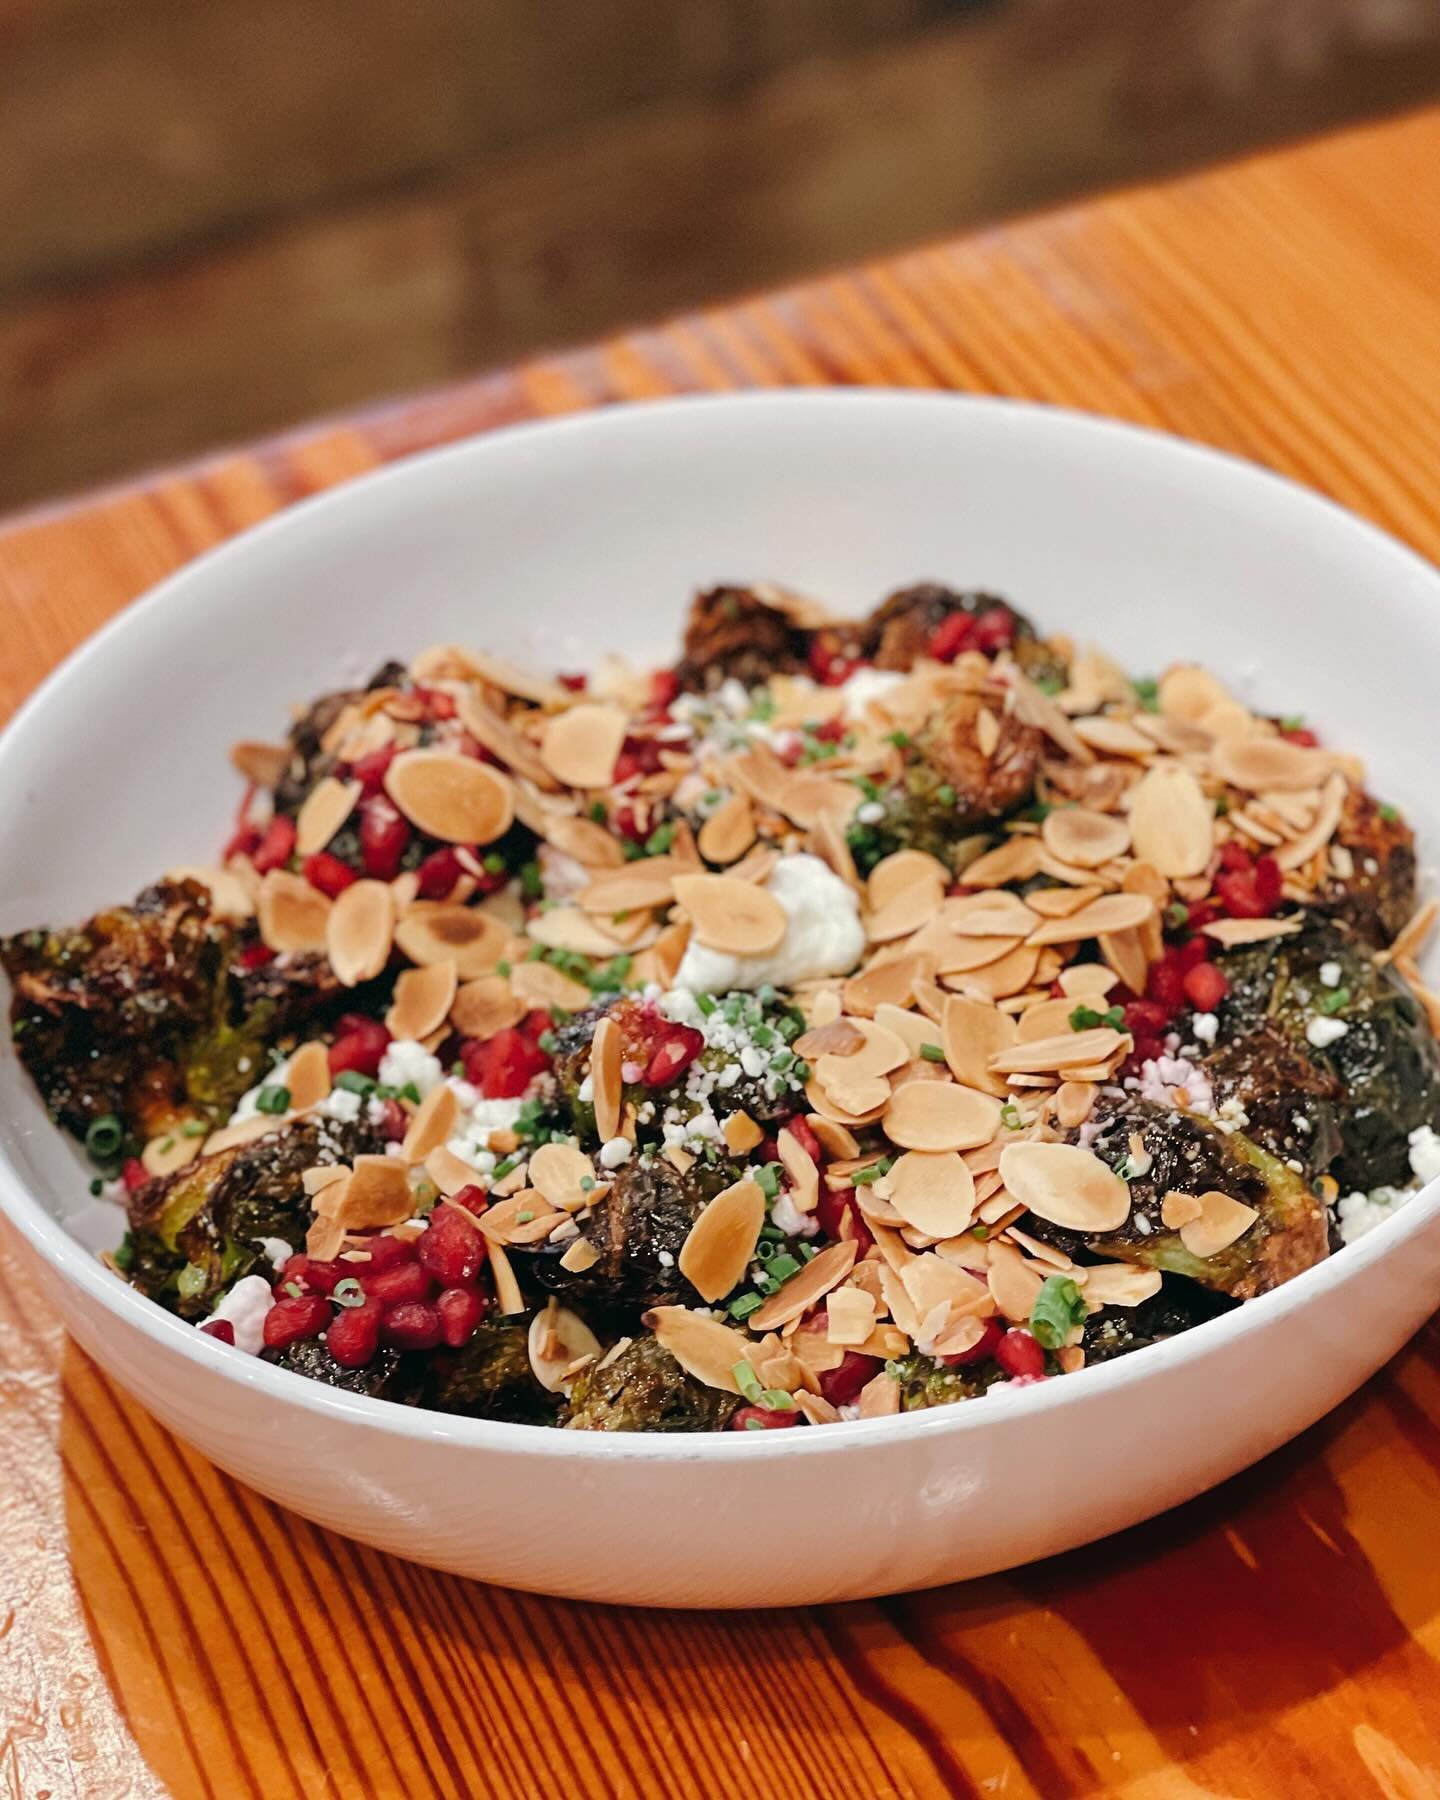 🍽️ Dine with Us &amp; Try Our Sweet-Chili Glazed Brussel Sprouts topped with Goat Cheese, Toasted Almonds &amp; Pomegranate Seeds! ☀️ Open 11AM to 9PM!